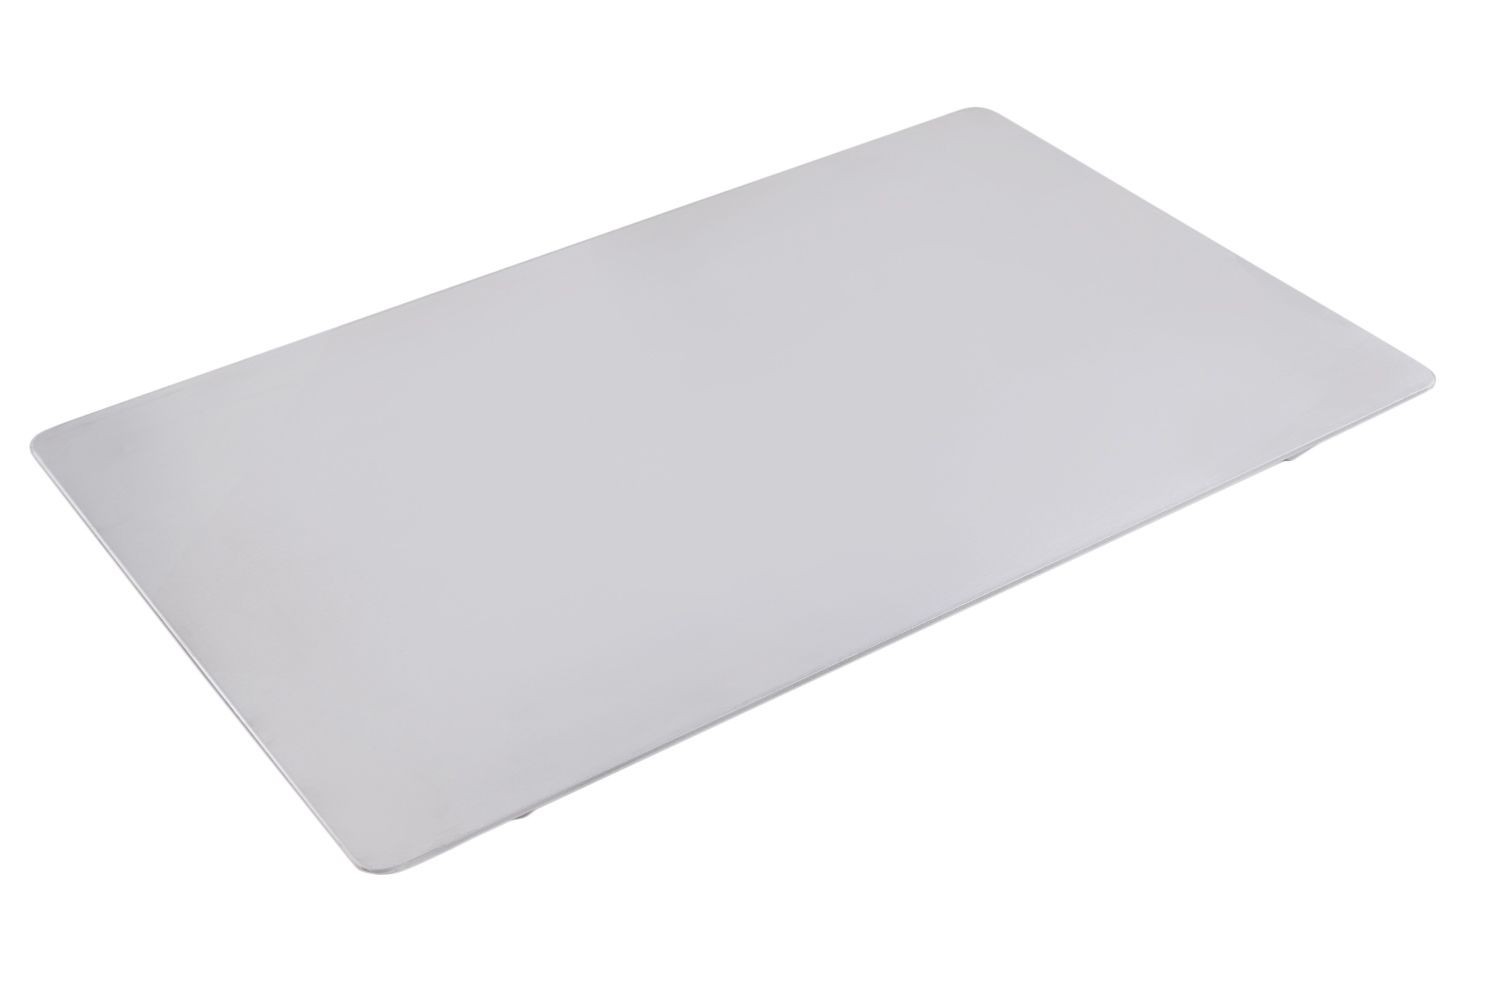 Bon Chef 96601 Stainless Steel Full Size Tile with Rectangles, 13 1/8" x 21 1/2"